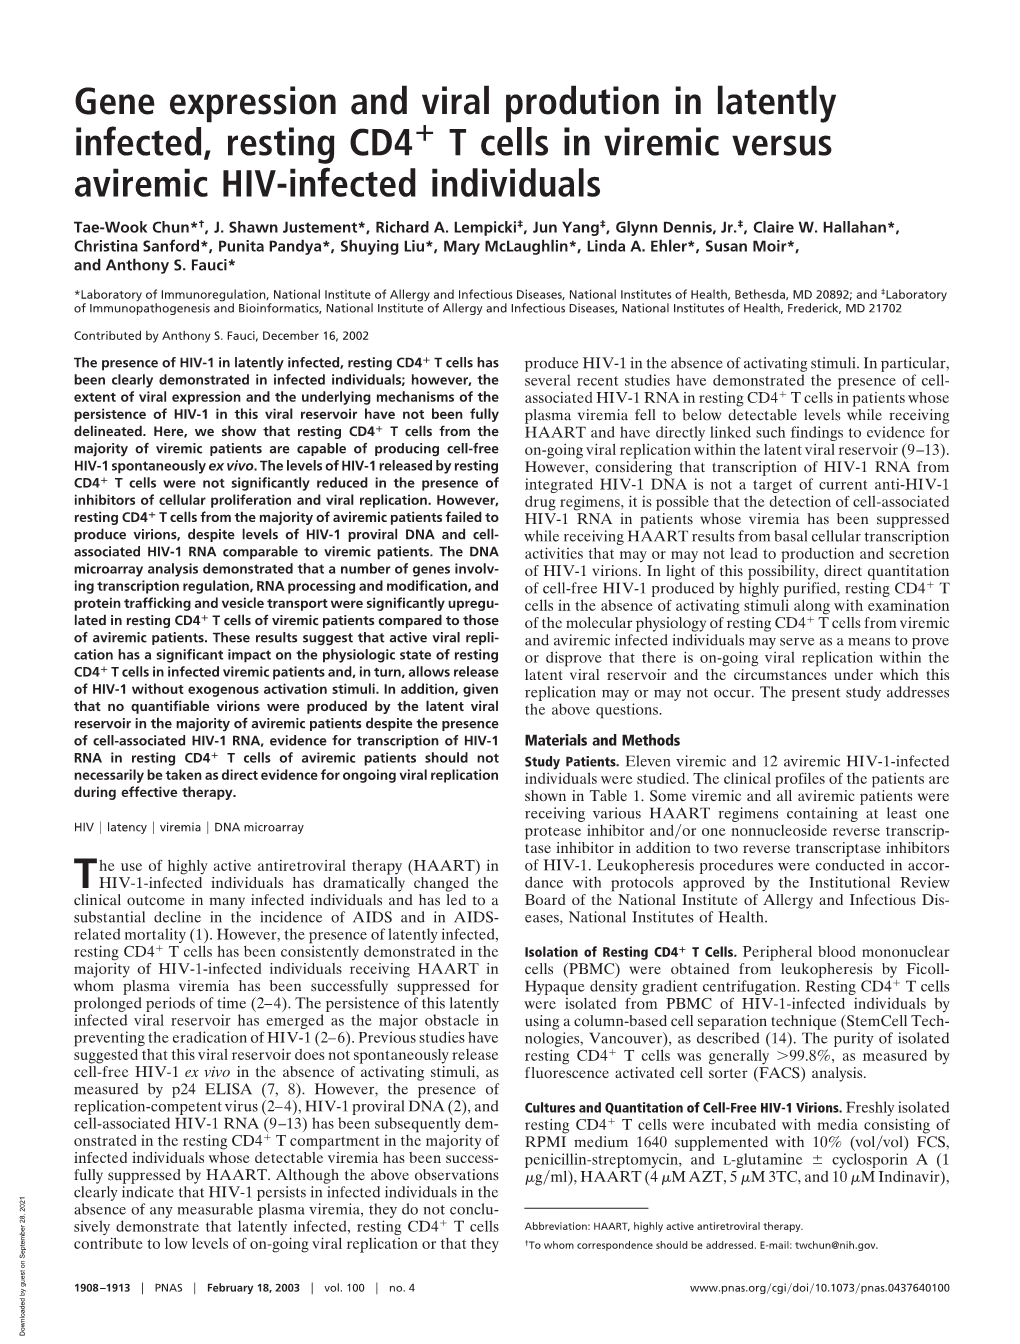 T Cells in Viremic Versus Aviremic HIV-Infected Individuals